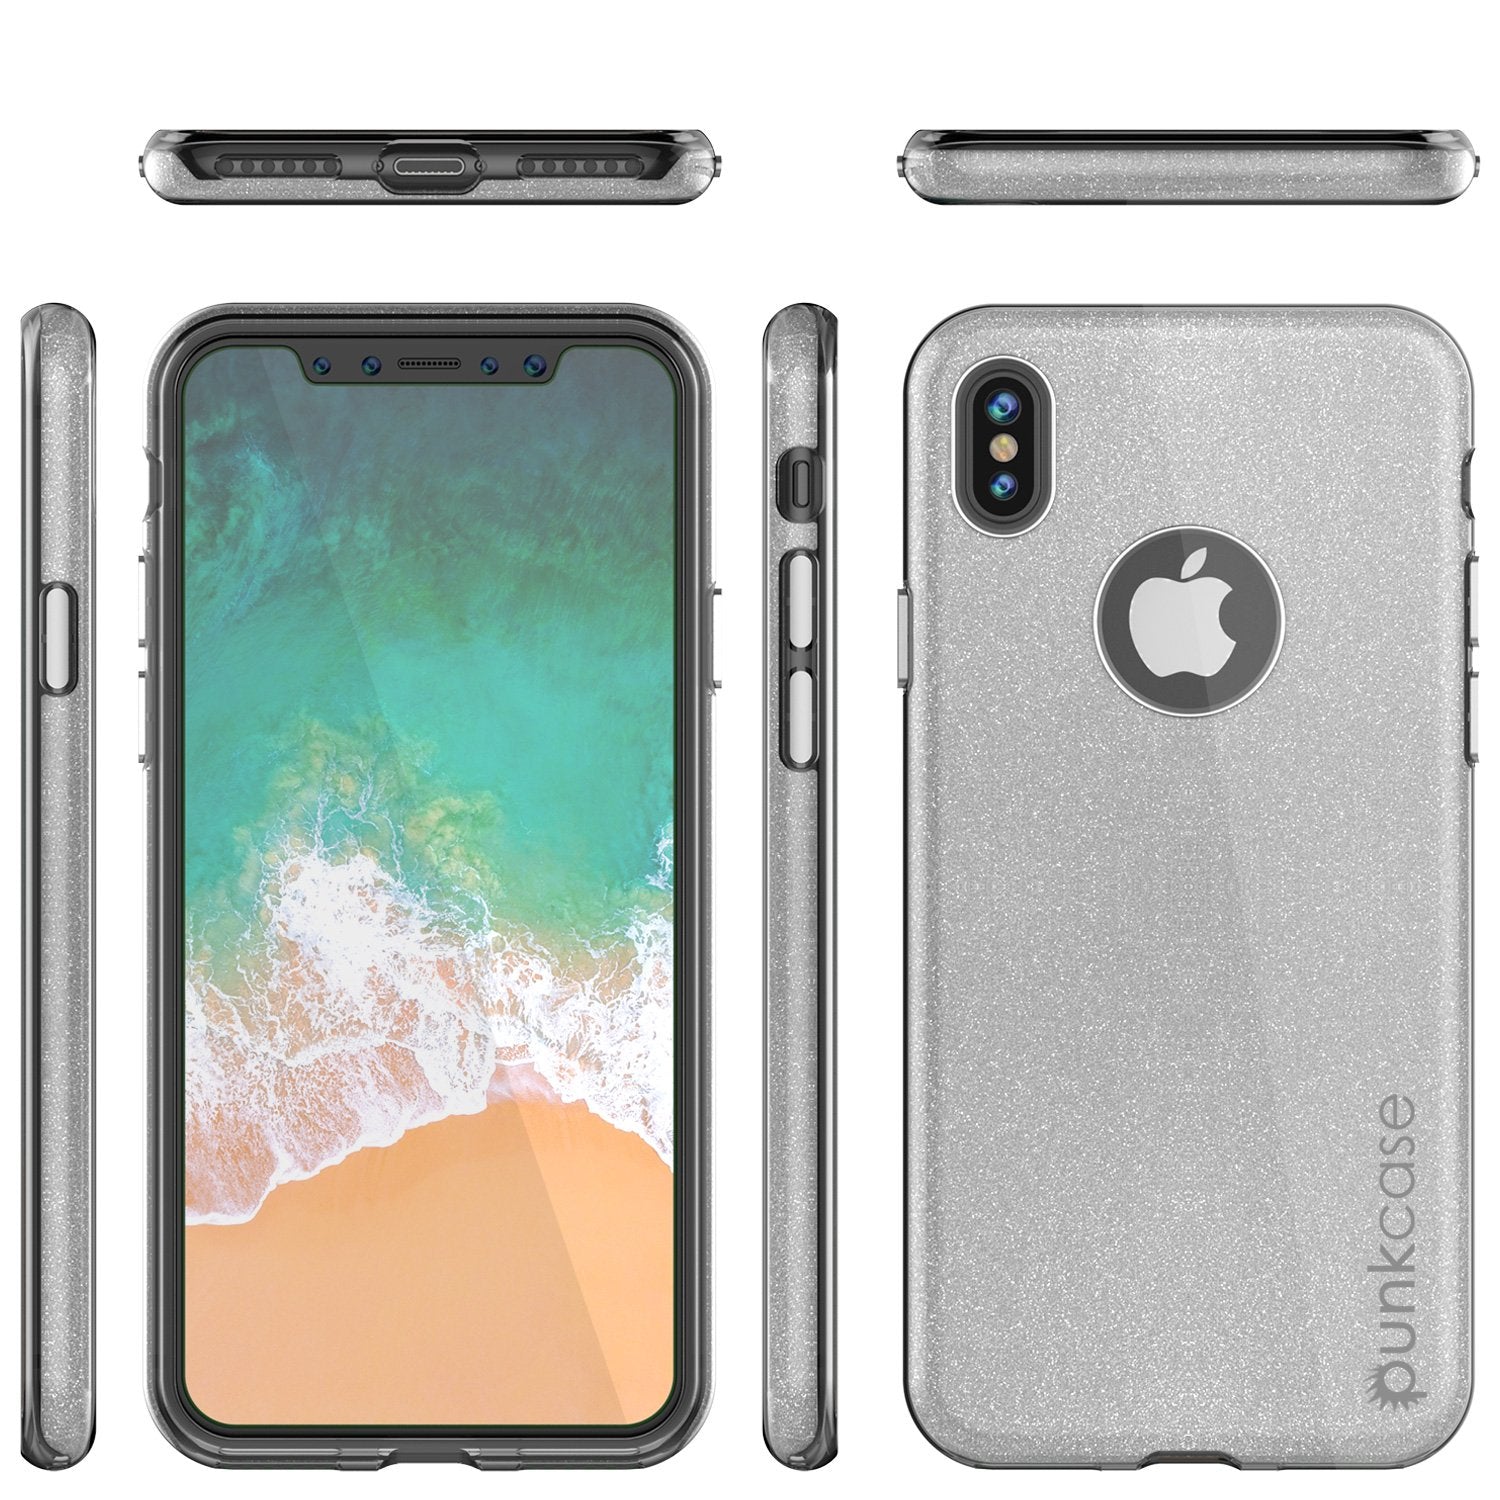 iPhone X Case, Punkcase Galactic 2.0 Series Ultra Slim w/ Tempered Glass Screen Protector | [Silver]